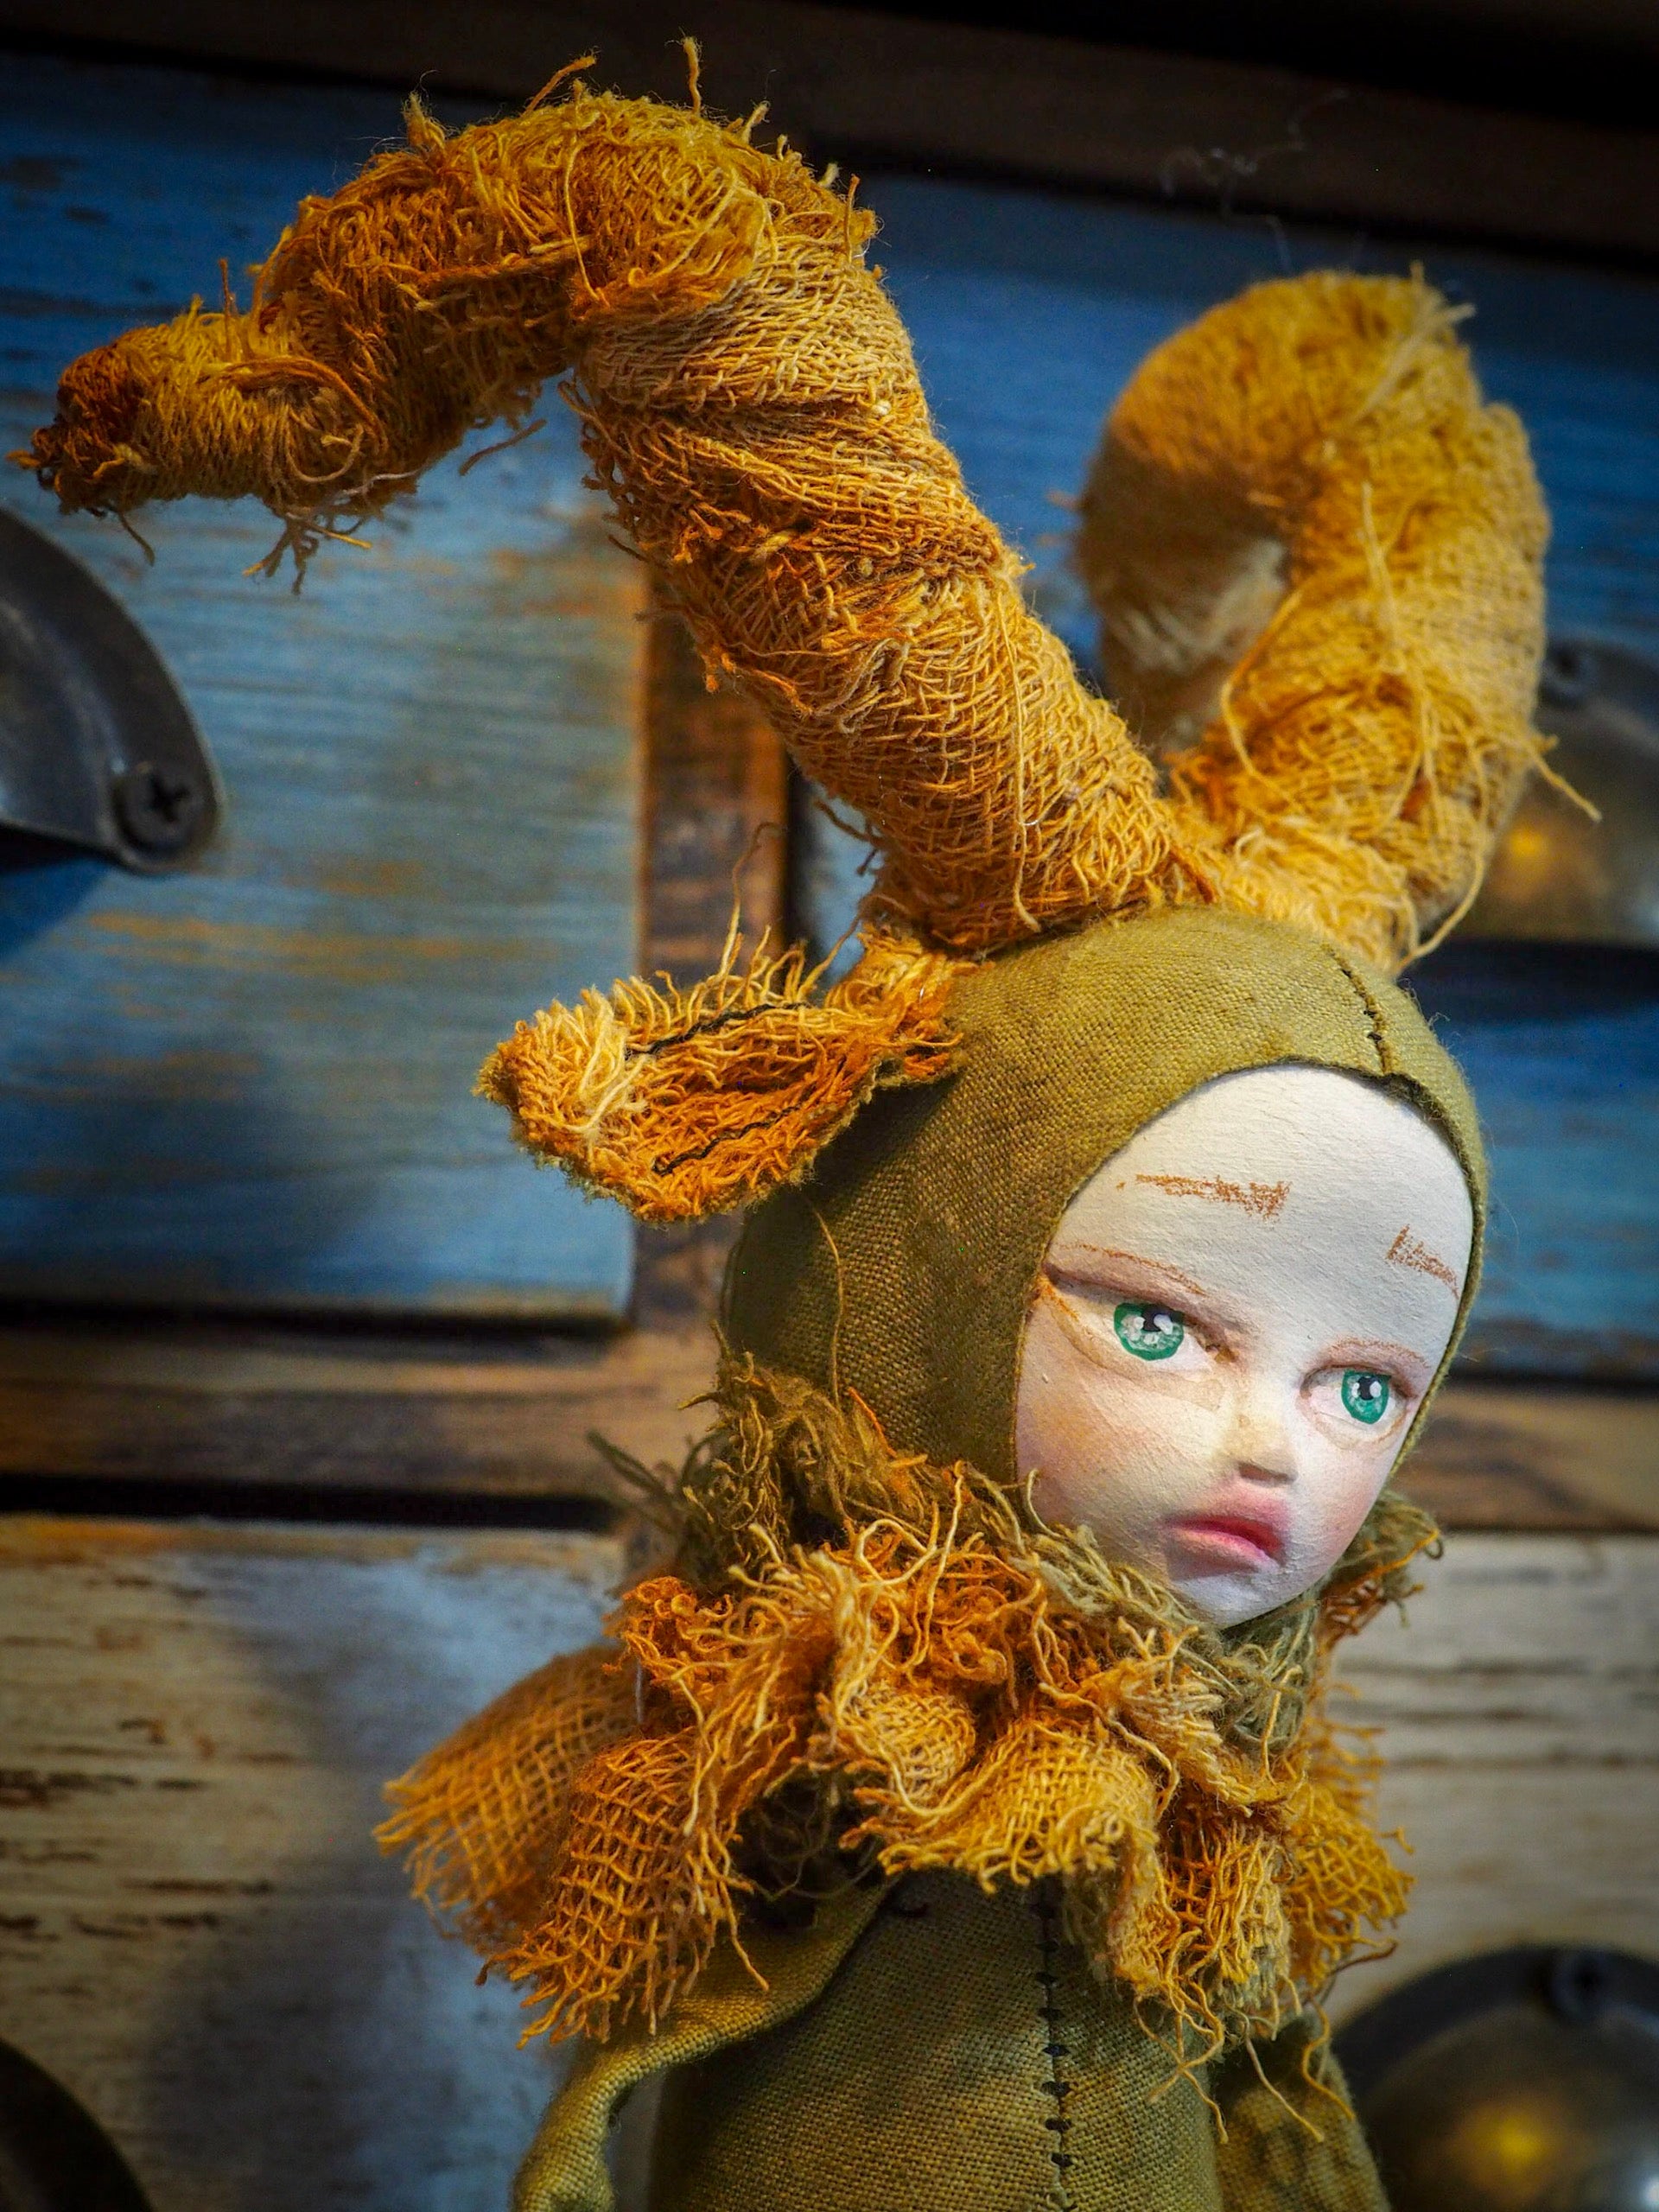 THE FAUN - An original handmade doll by Danita Art, made with original patterns, organic fabric dyed using only natural ingredients like avocado peels, walnuts and marigolds. Each mini art doll in this toy collection is a mini work of huggable fabric art to be treasured by any collector of Danita's melancholic and fantastic work.